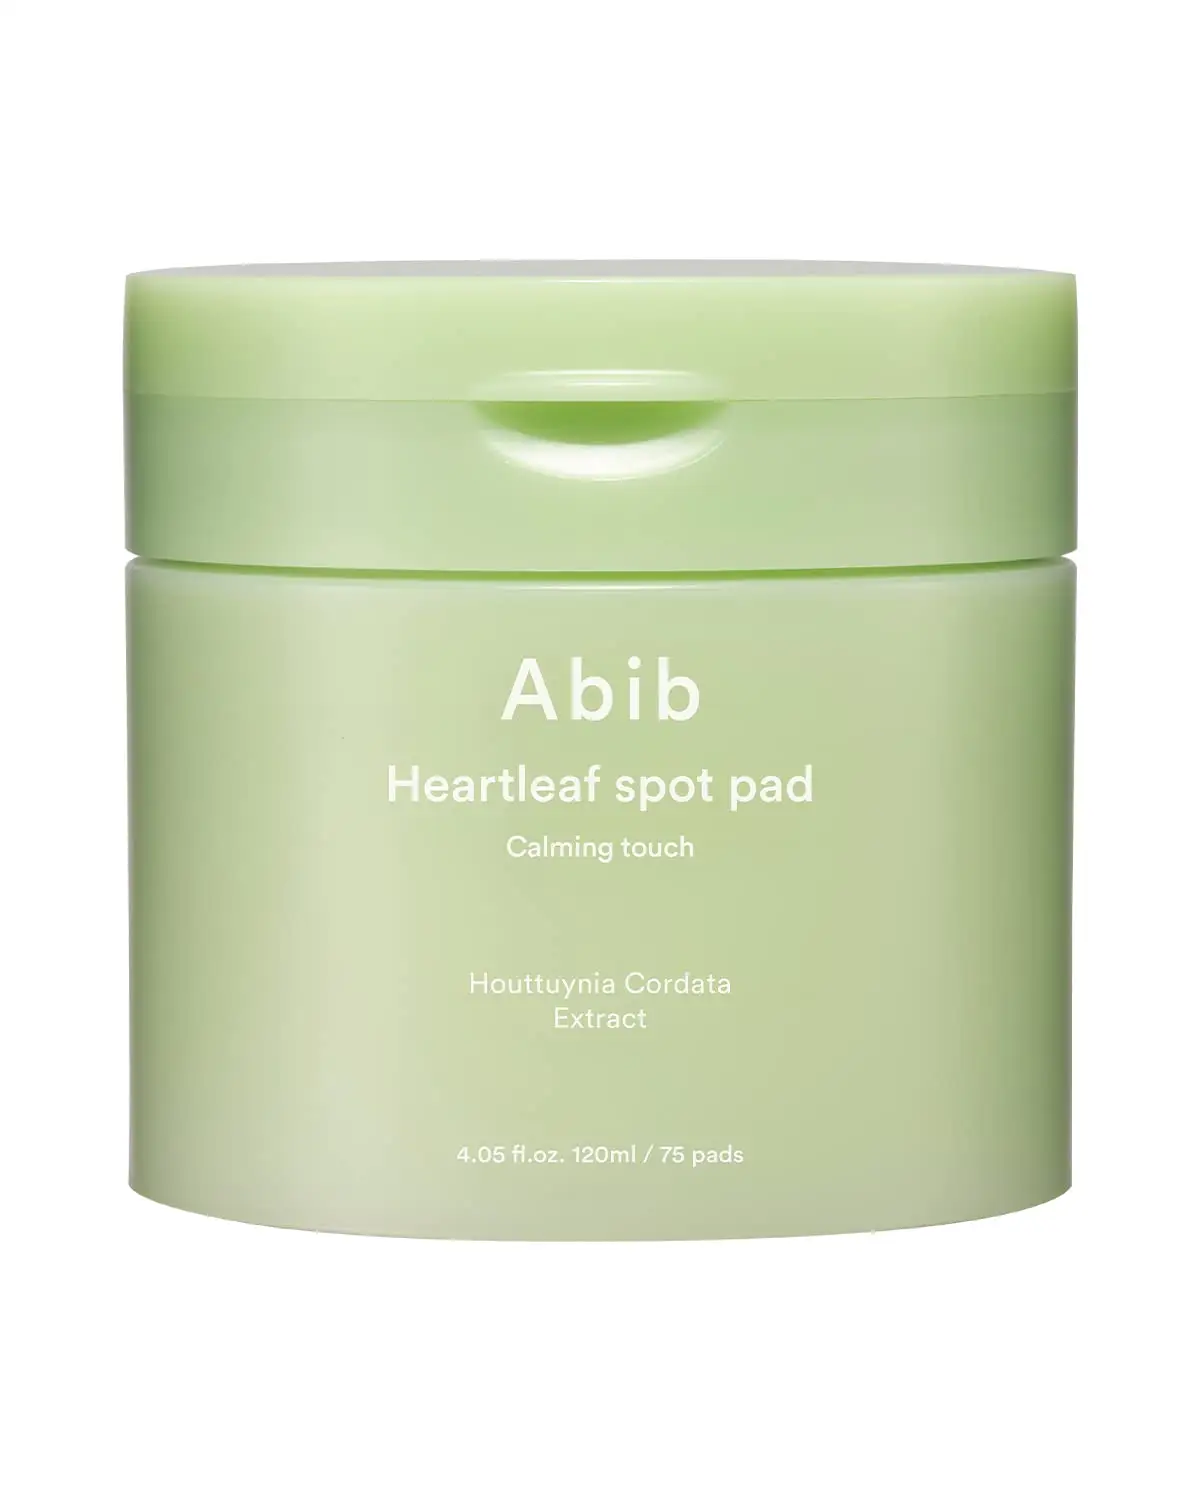 Abib Heartleaf Spot pad Calming touch (75 pads) Korean Skin Care Calming Soothing Moisturizing